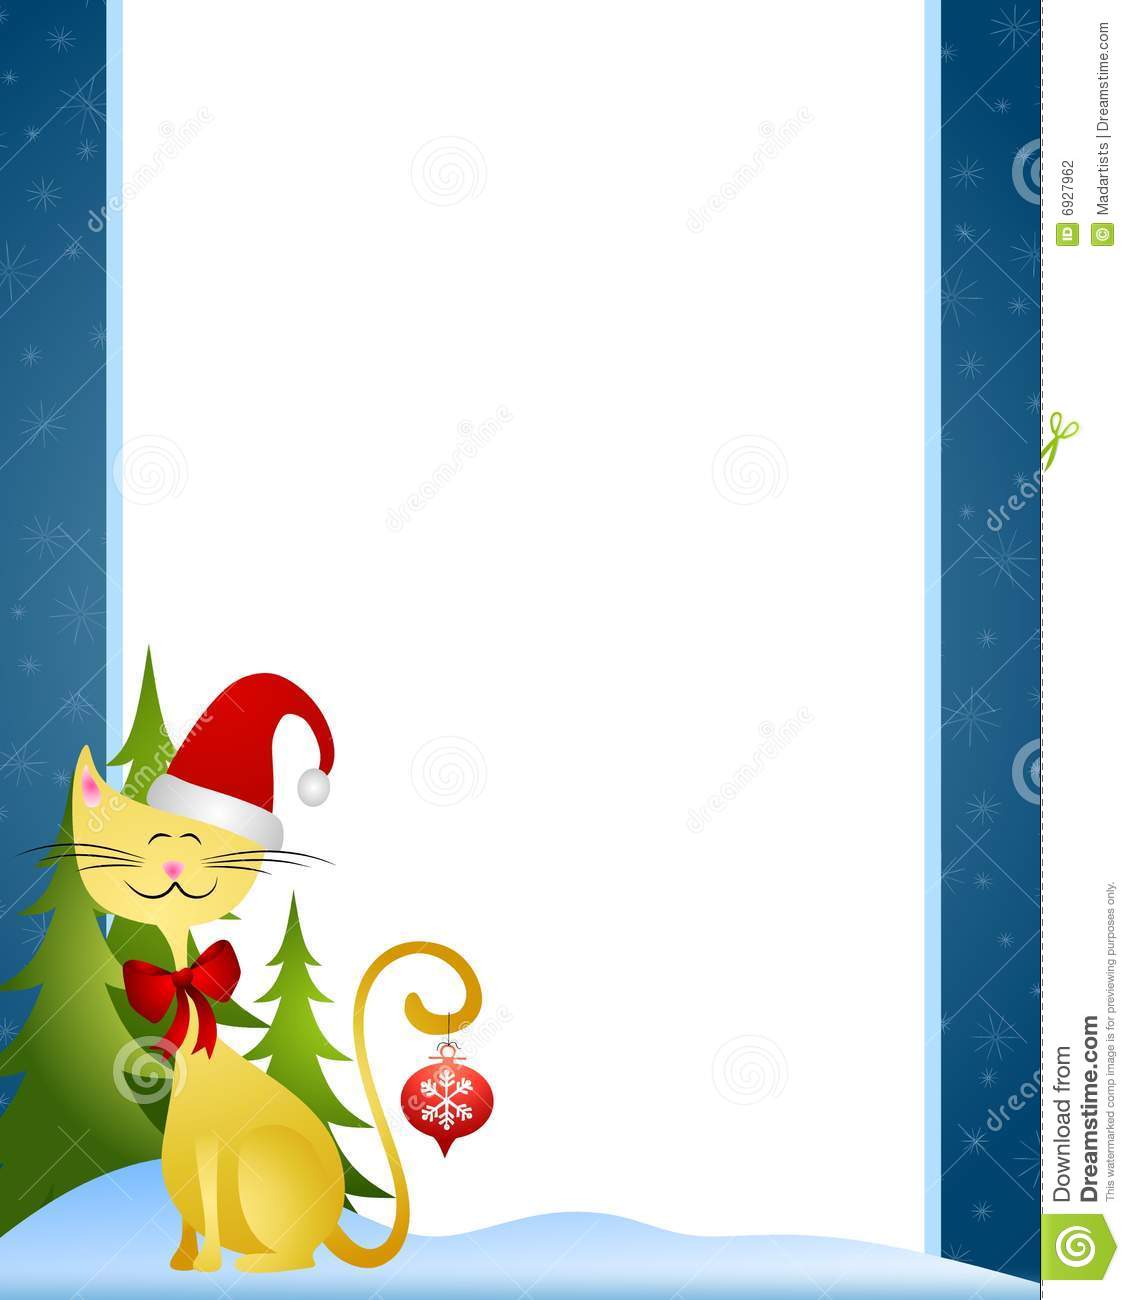 Christmas Cookie Border Clipart   Clipart Panda   Free Clipart Images